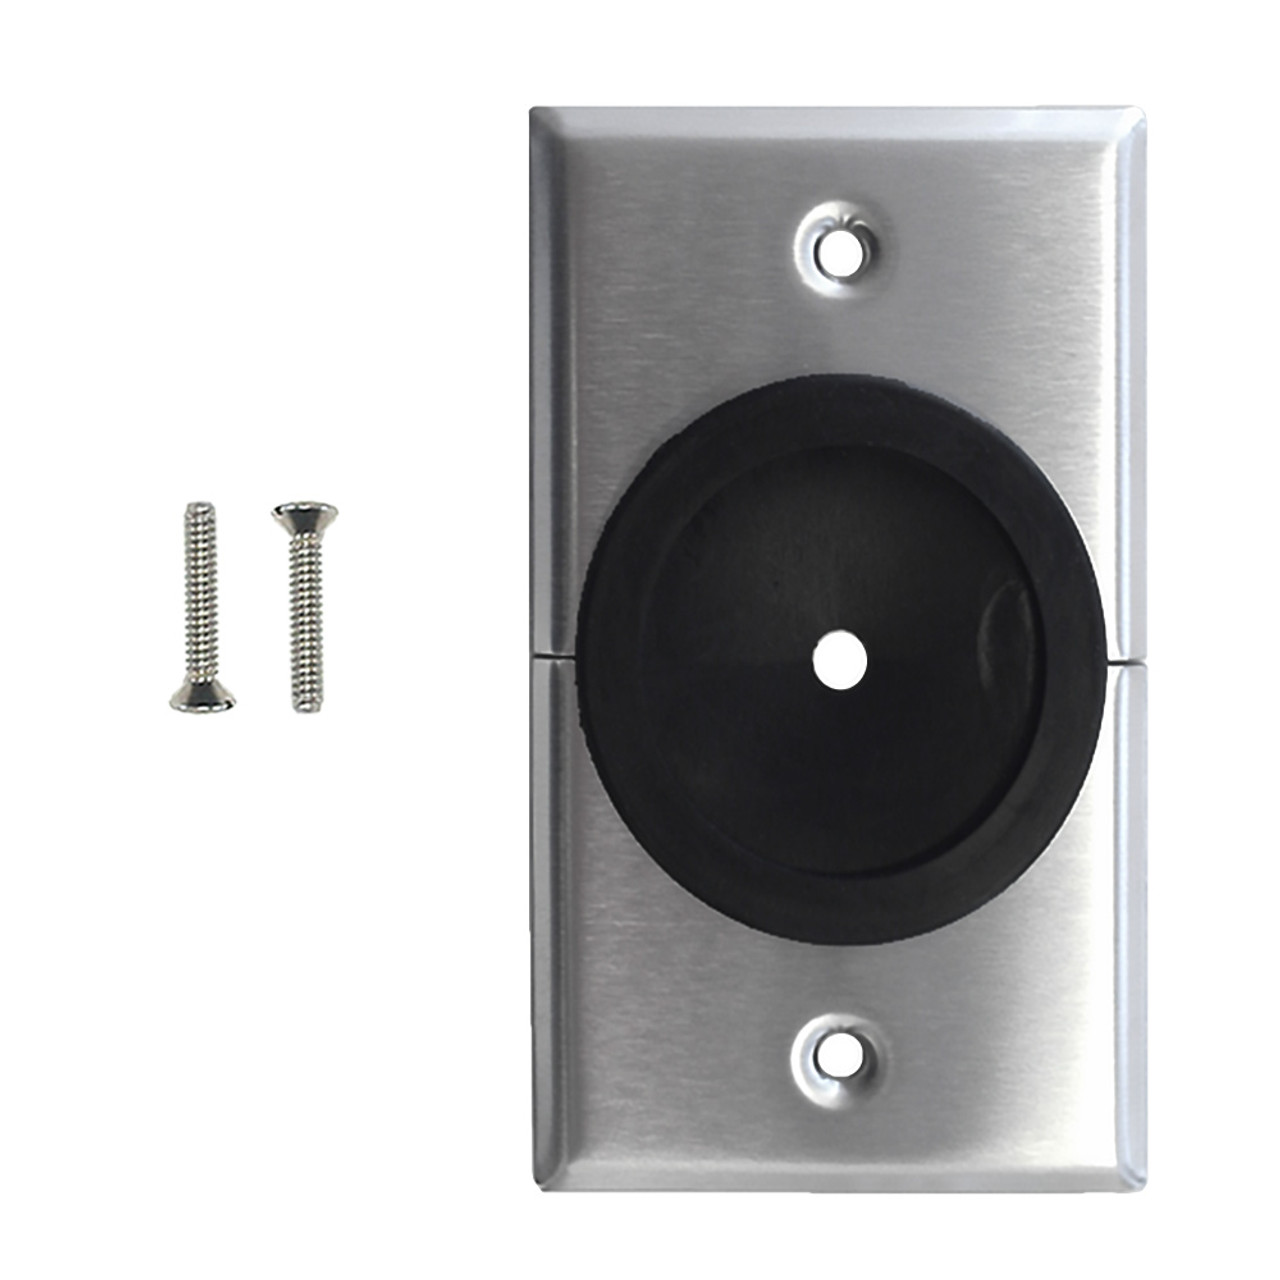 Cable Pass through Wall Plate Removable Bottom Single Gang Stainless Steel Split